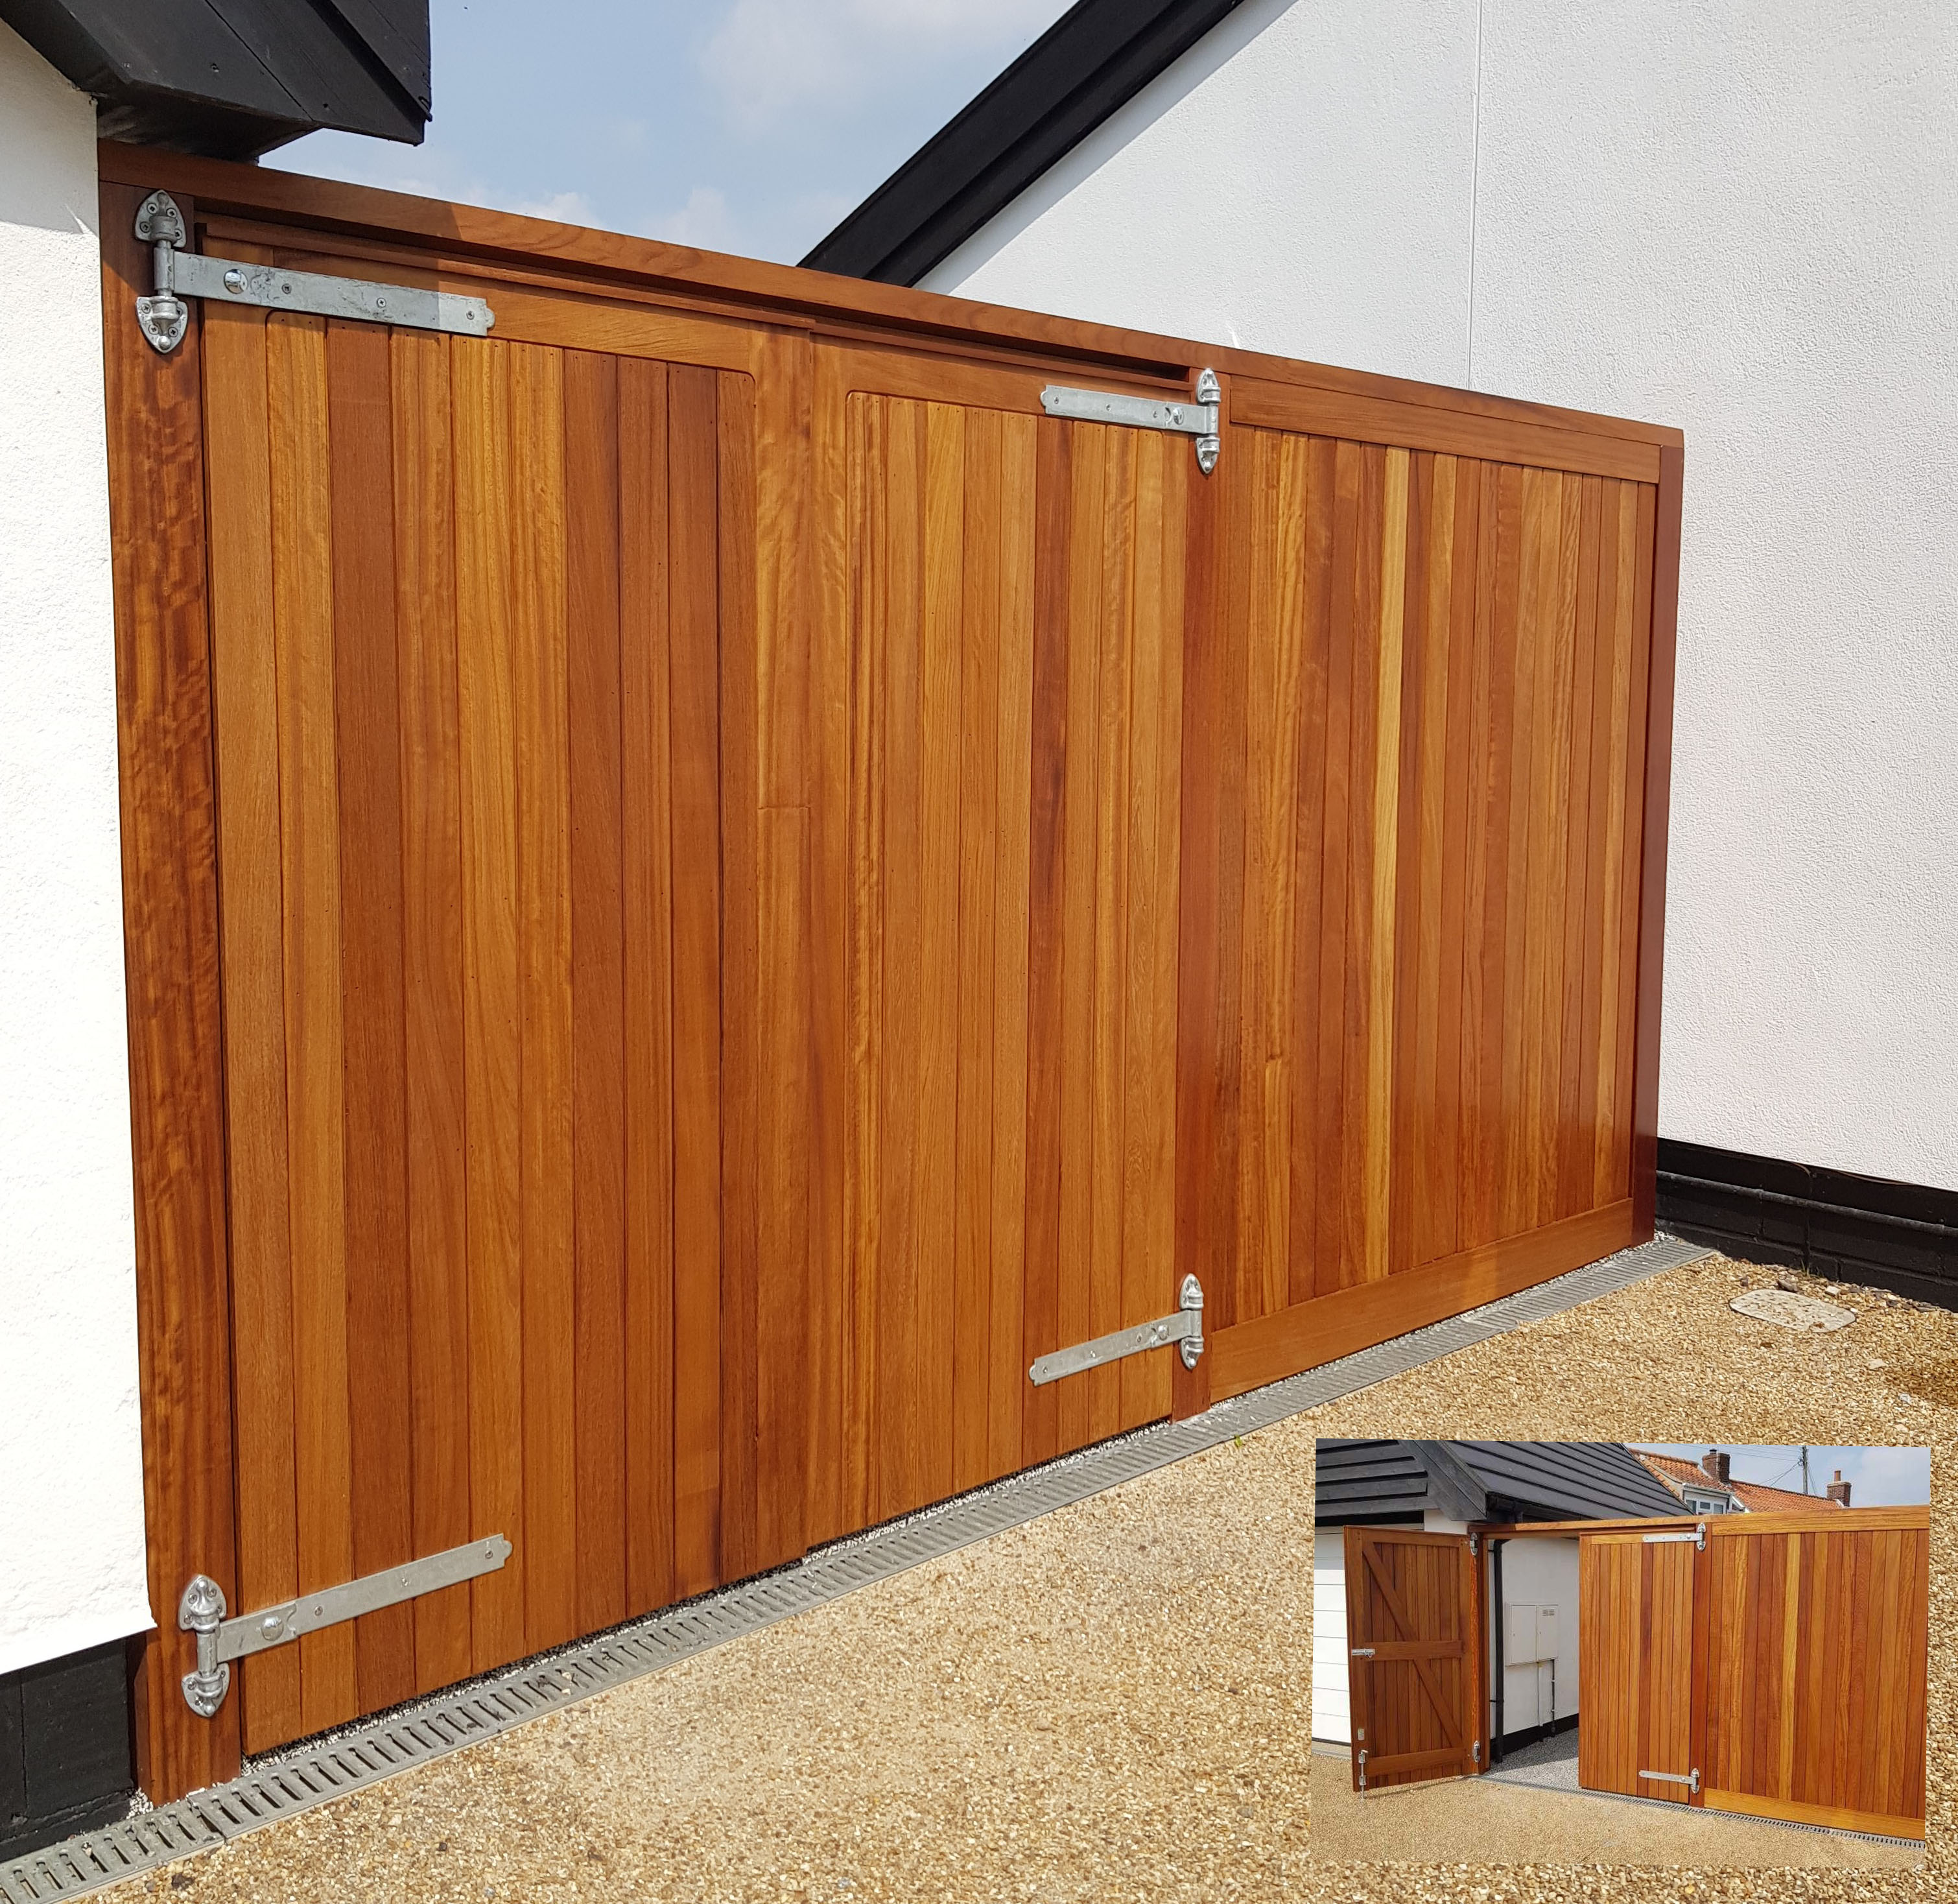 Blyth gate and side panel with header rail all in Iroko